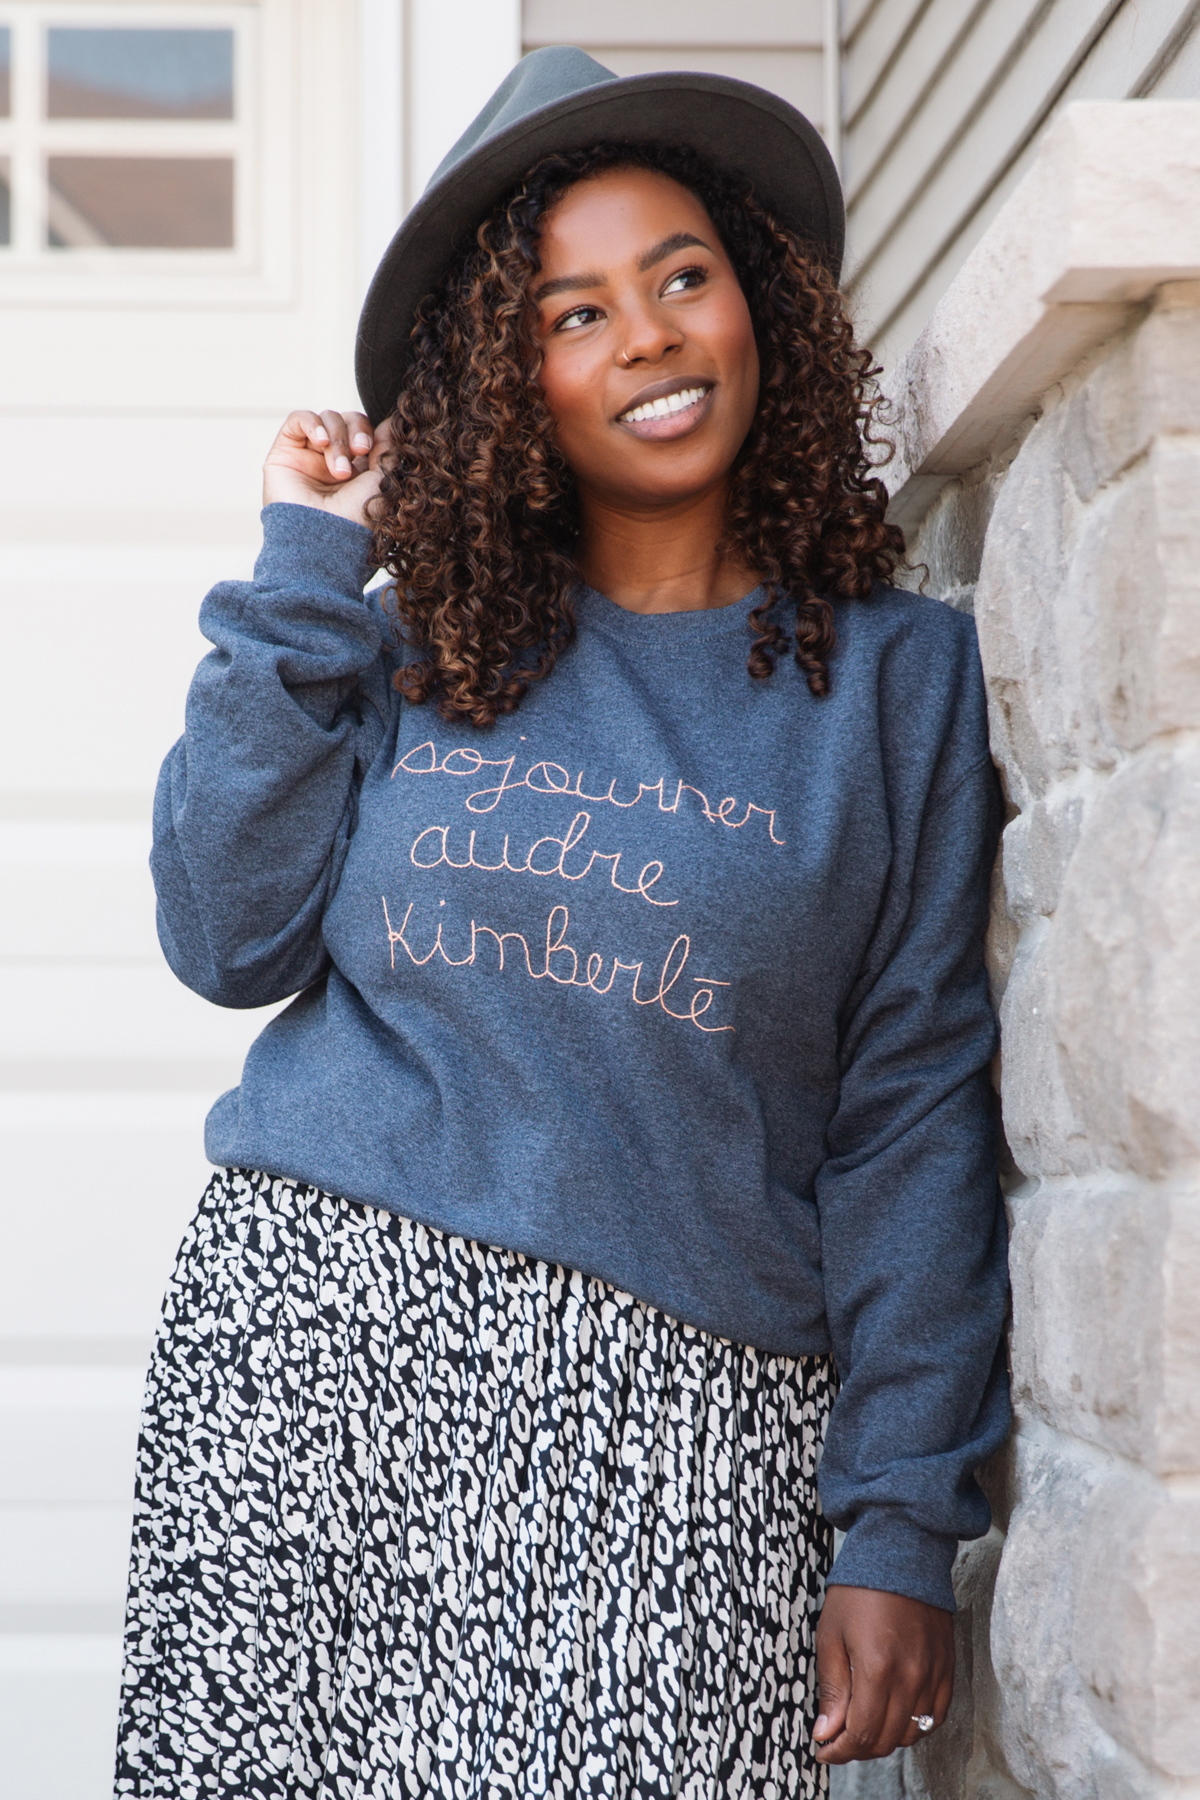 Charcoal grey sweater with names hand-embroidered